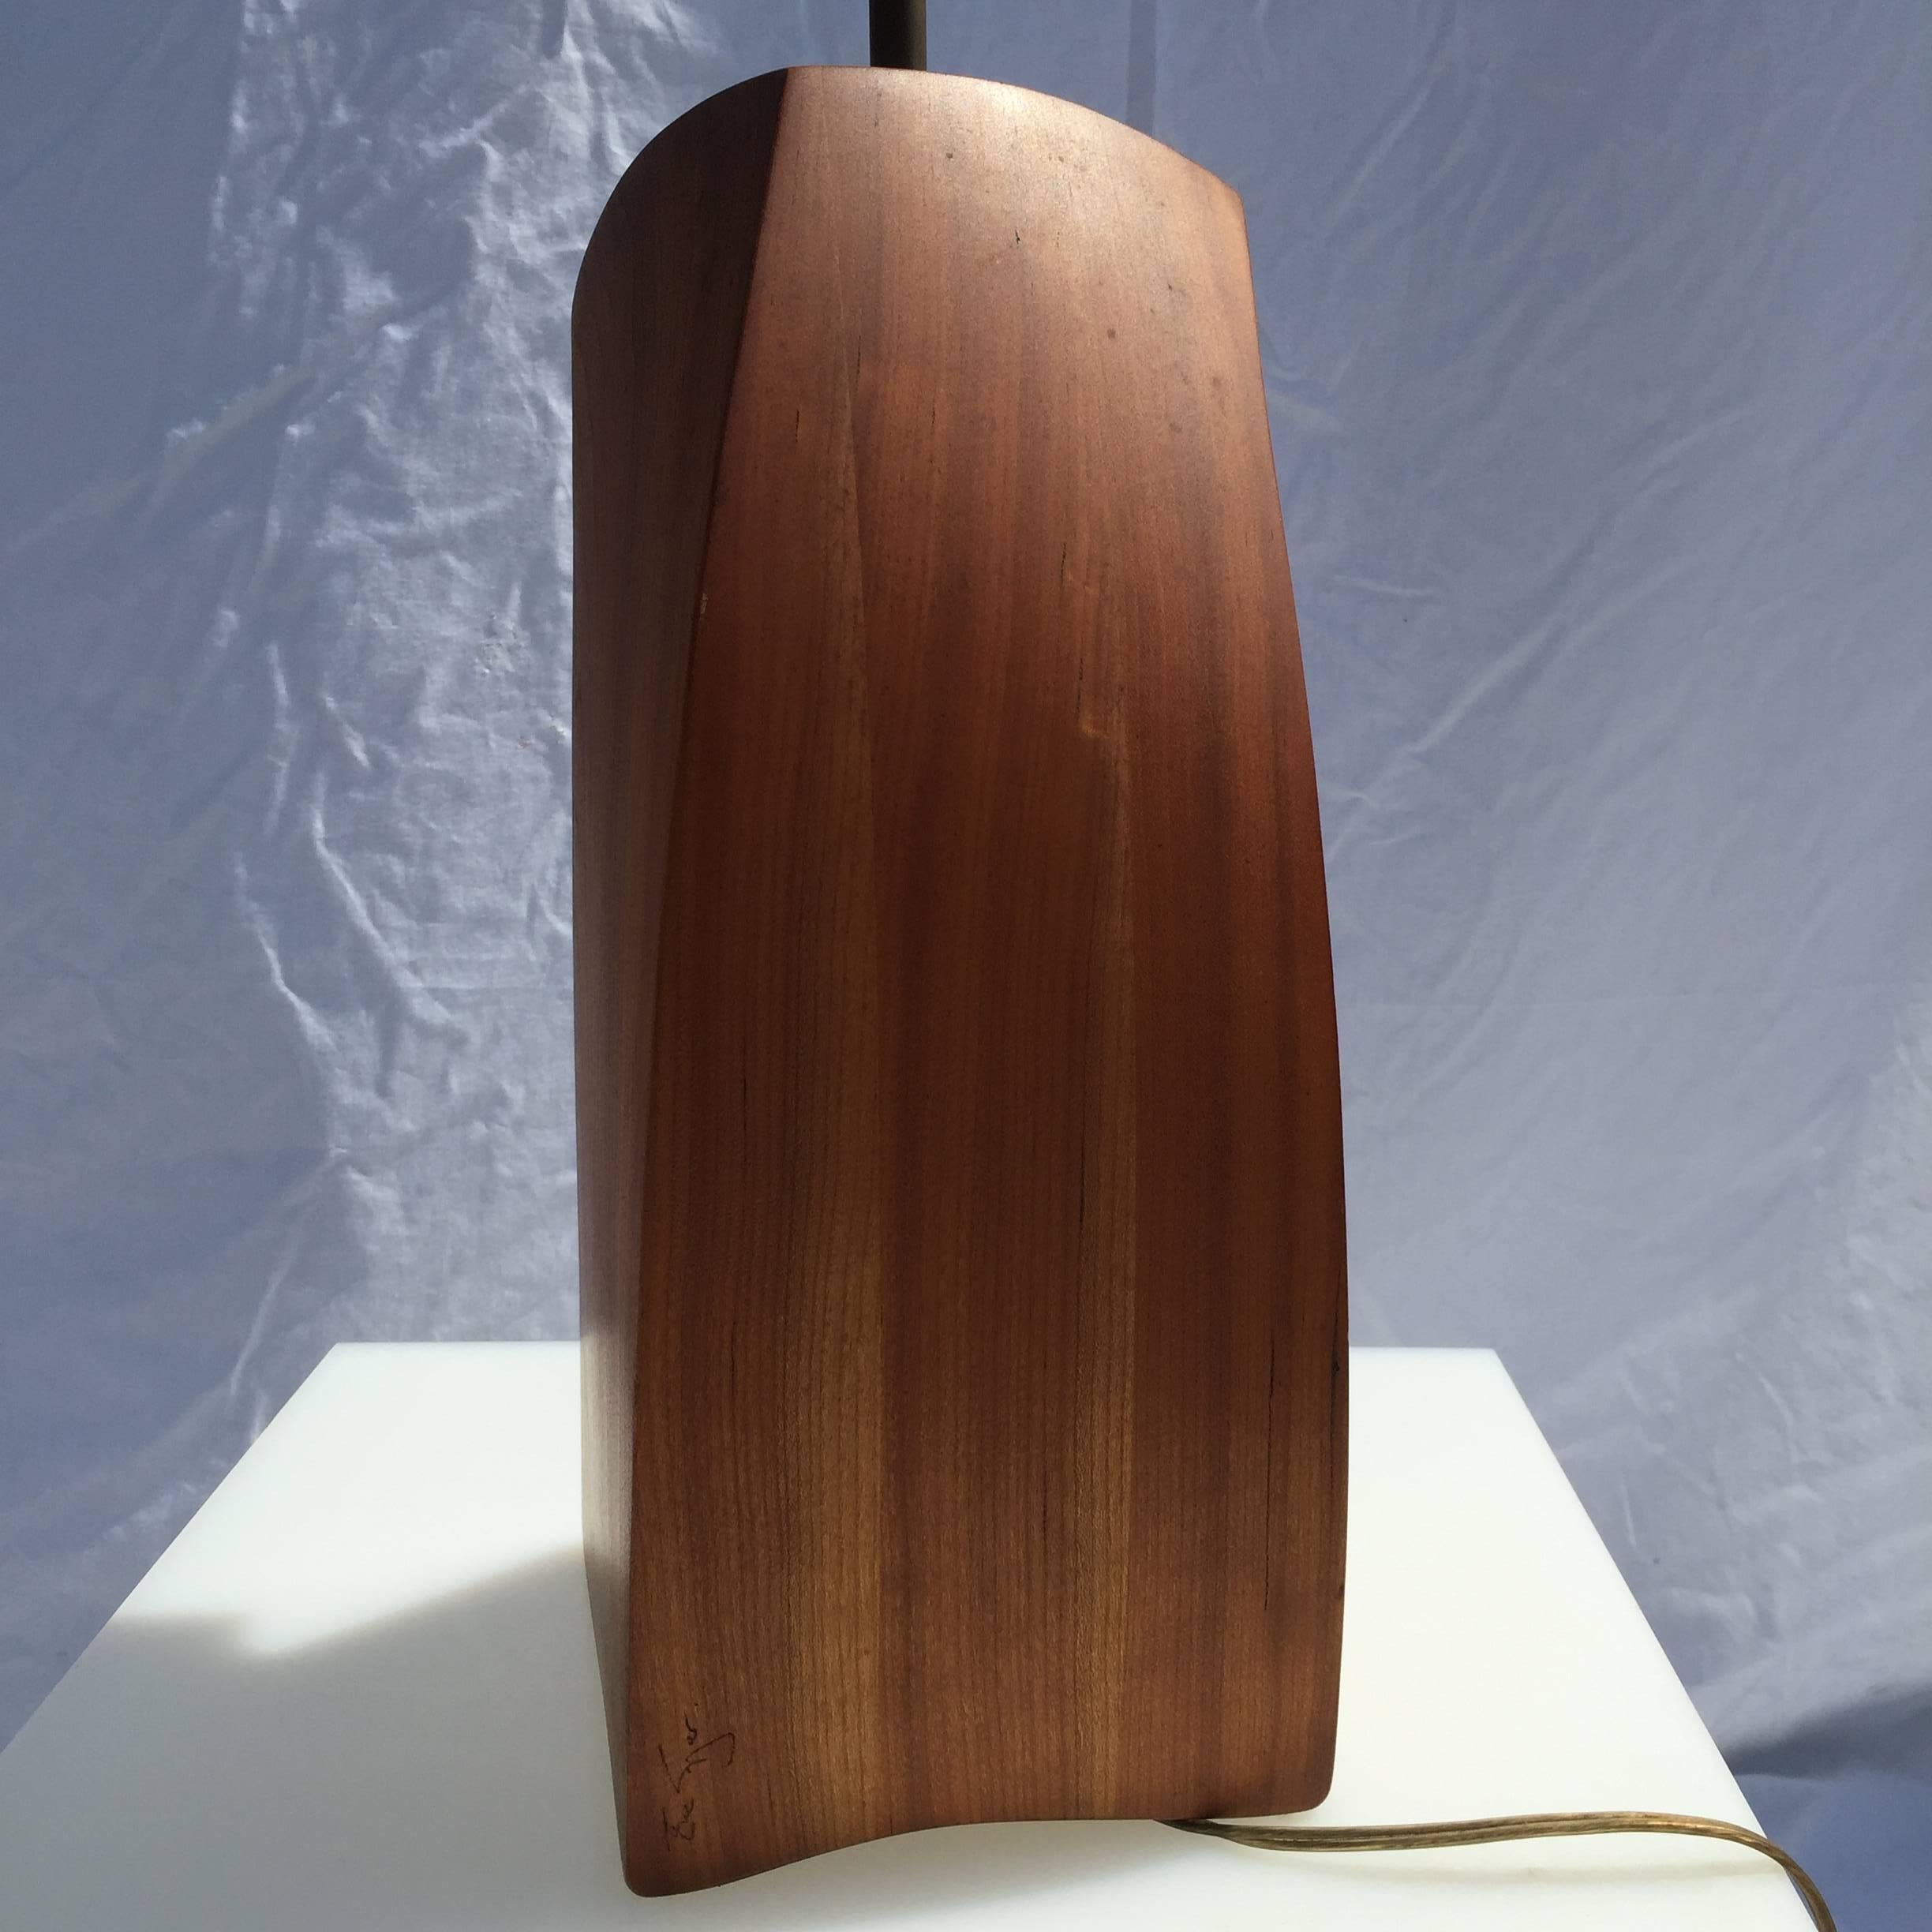 20th Century Signed Craft Wood Table Lamp by American Artist Woodworker Eric Sprenger